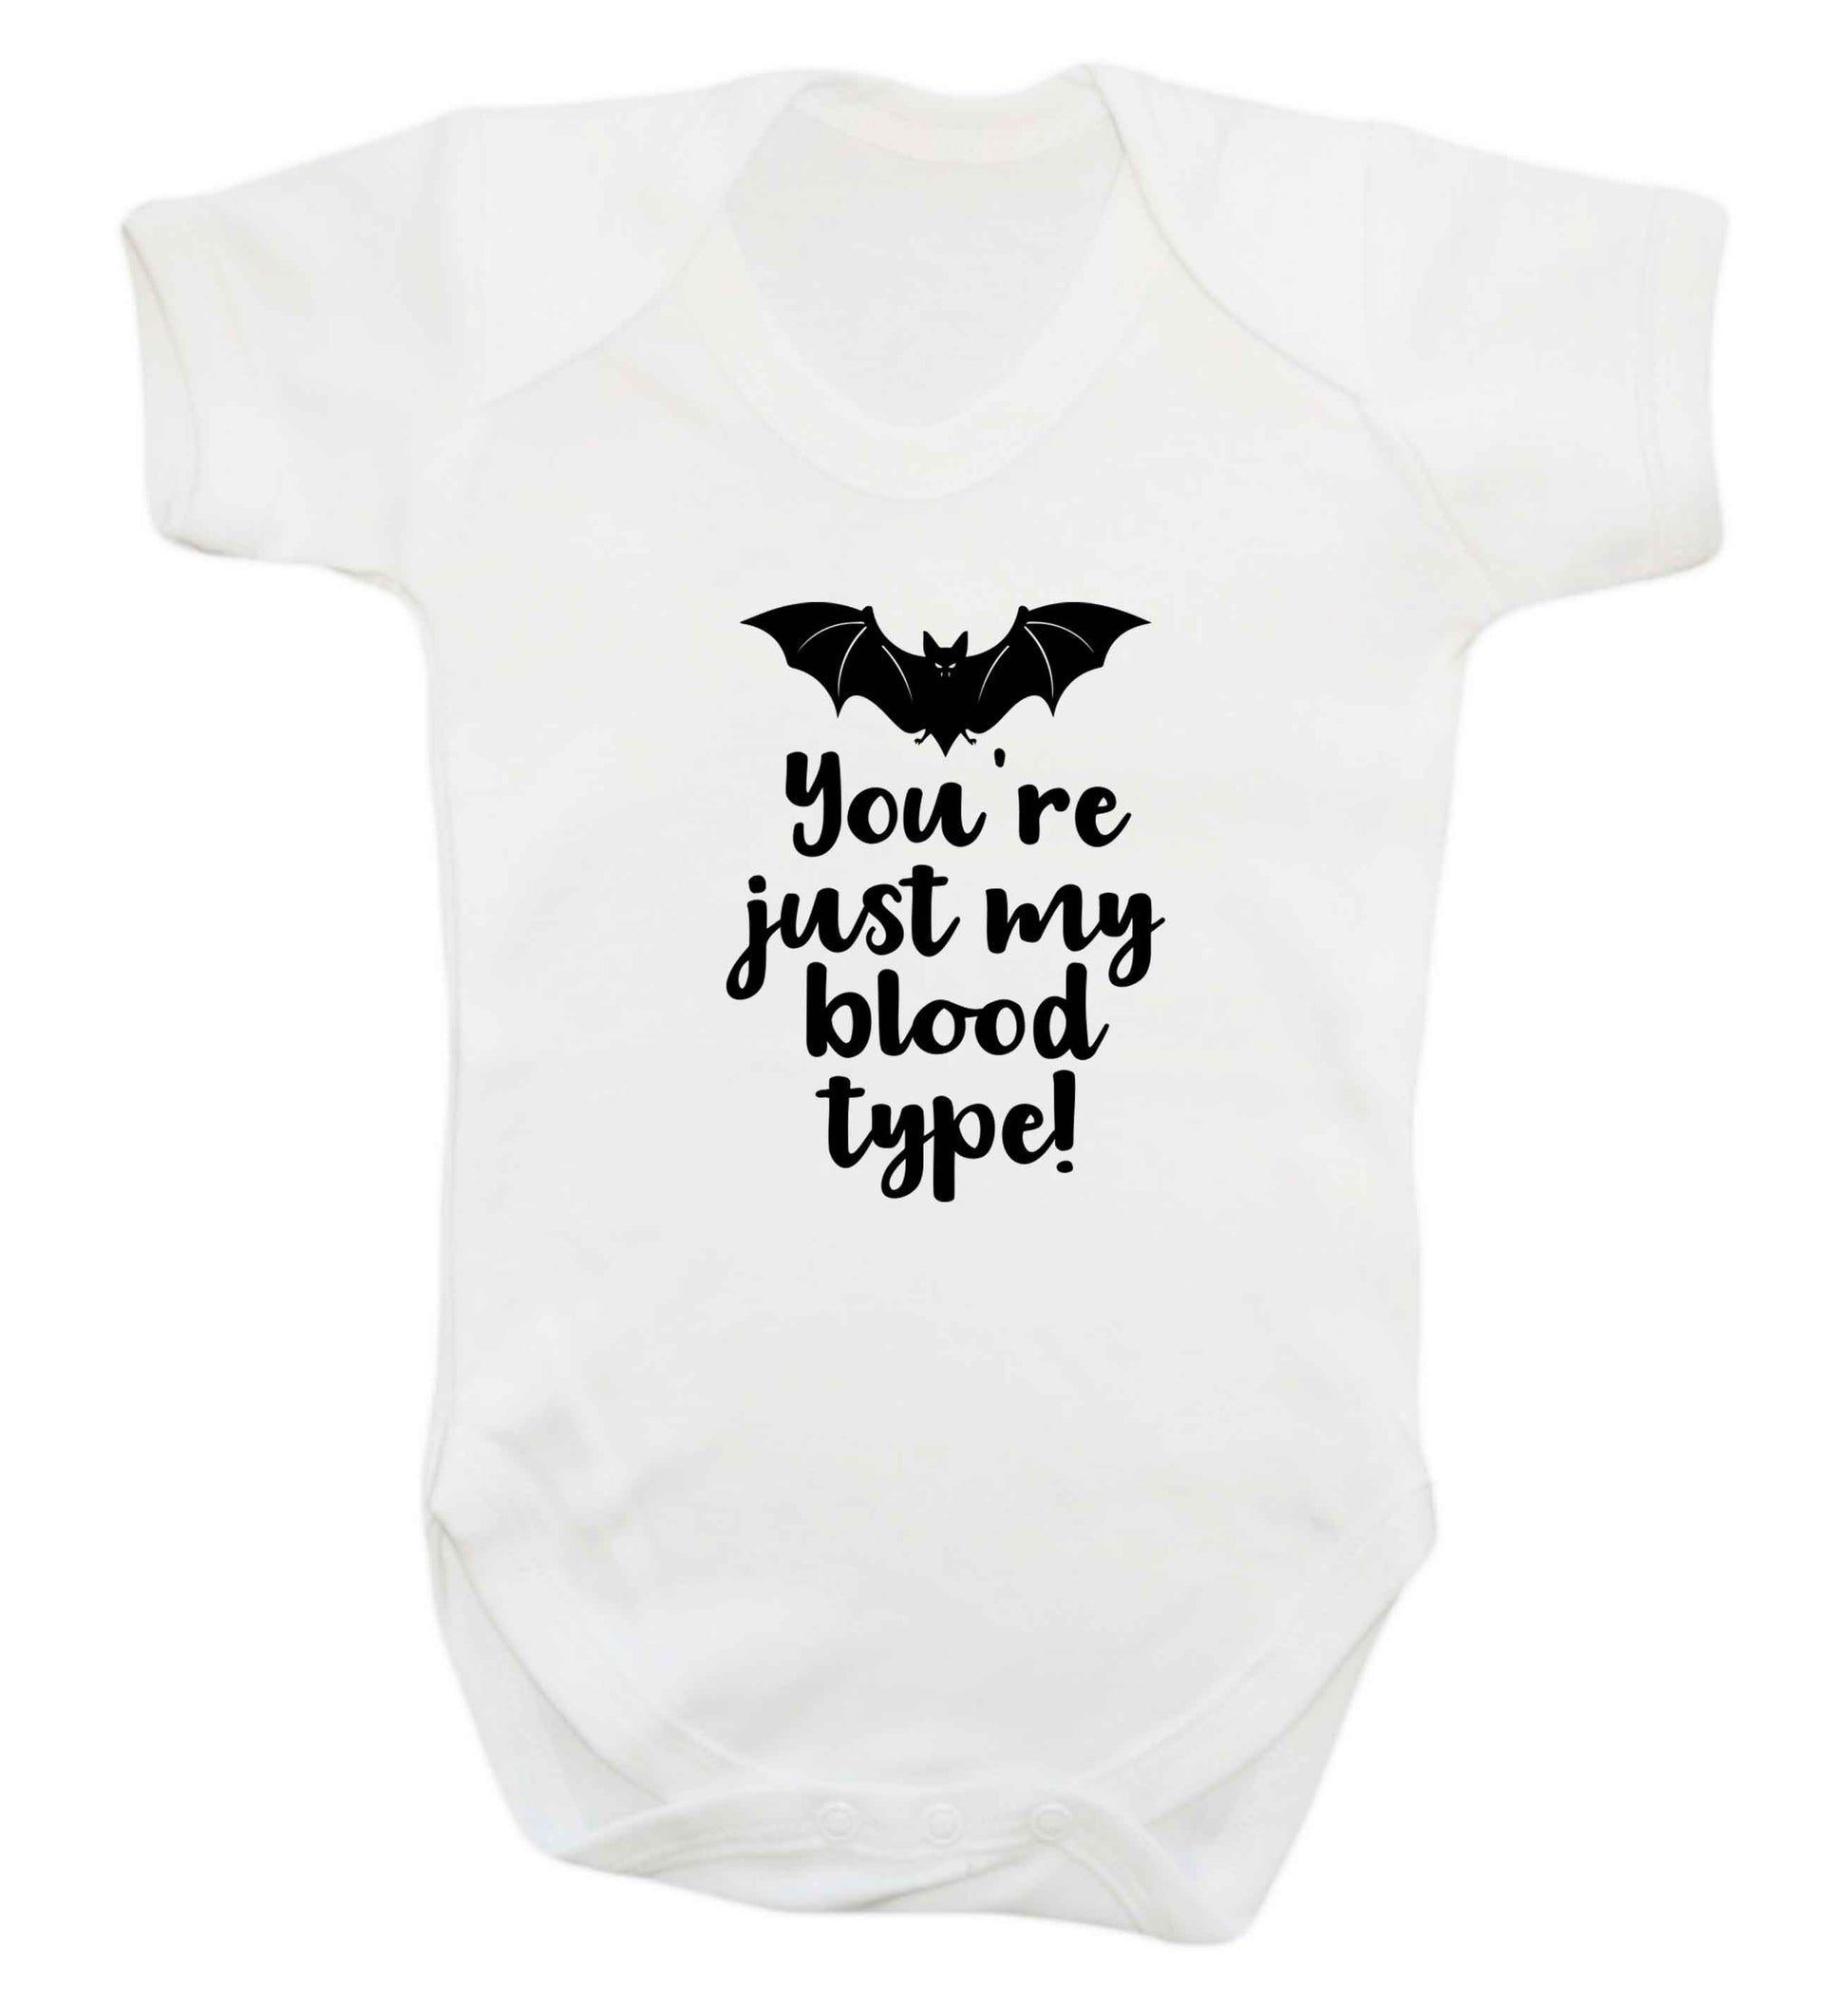 You're just my blood type baby vest white 18-24 months